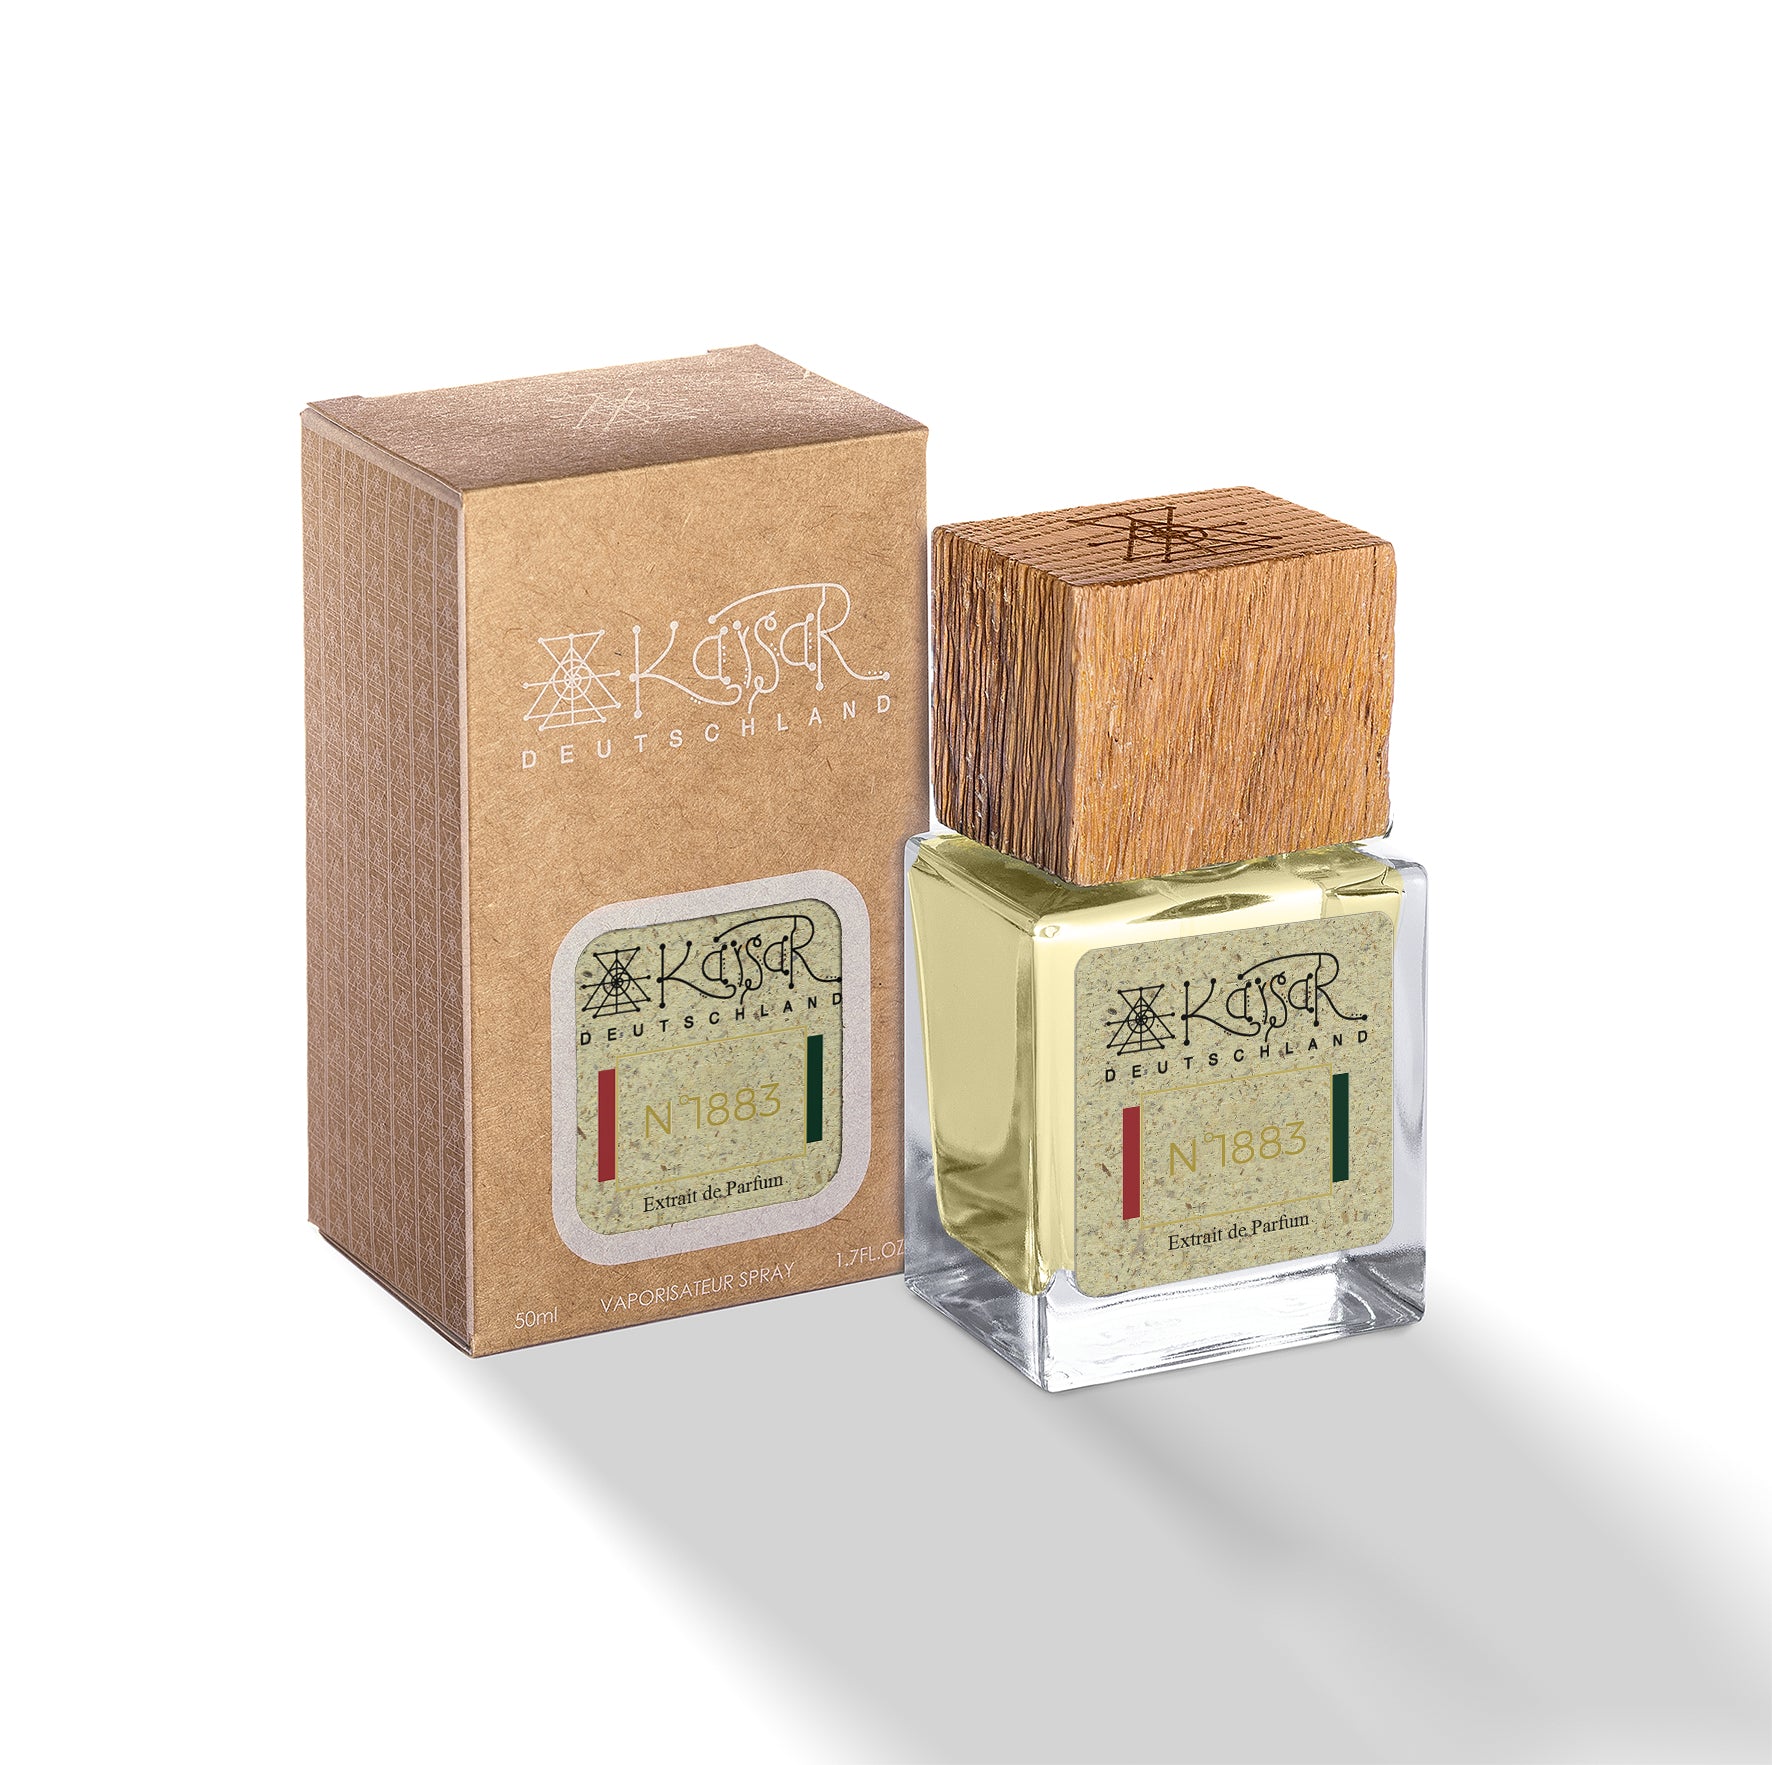 DH 1883 Naxos Scent